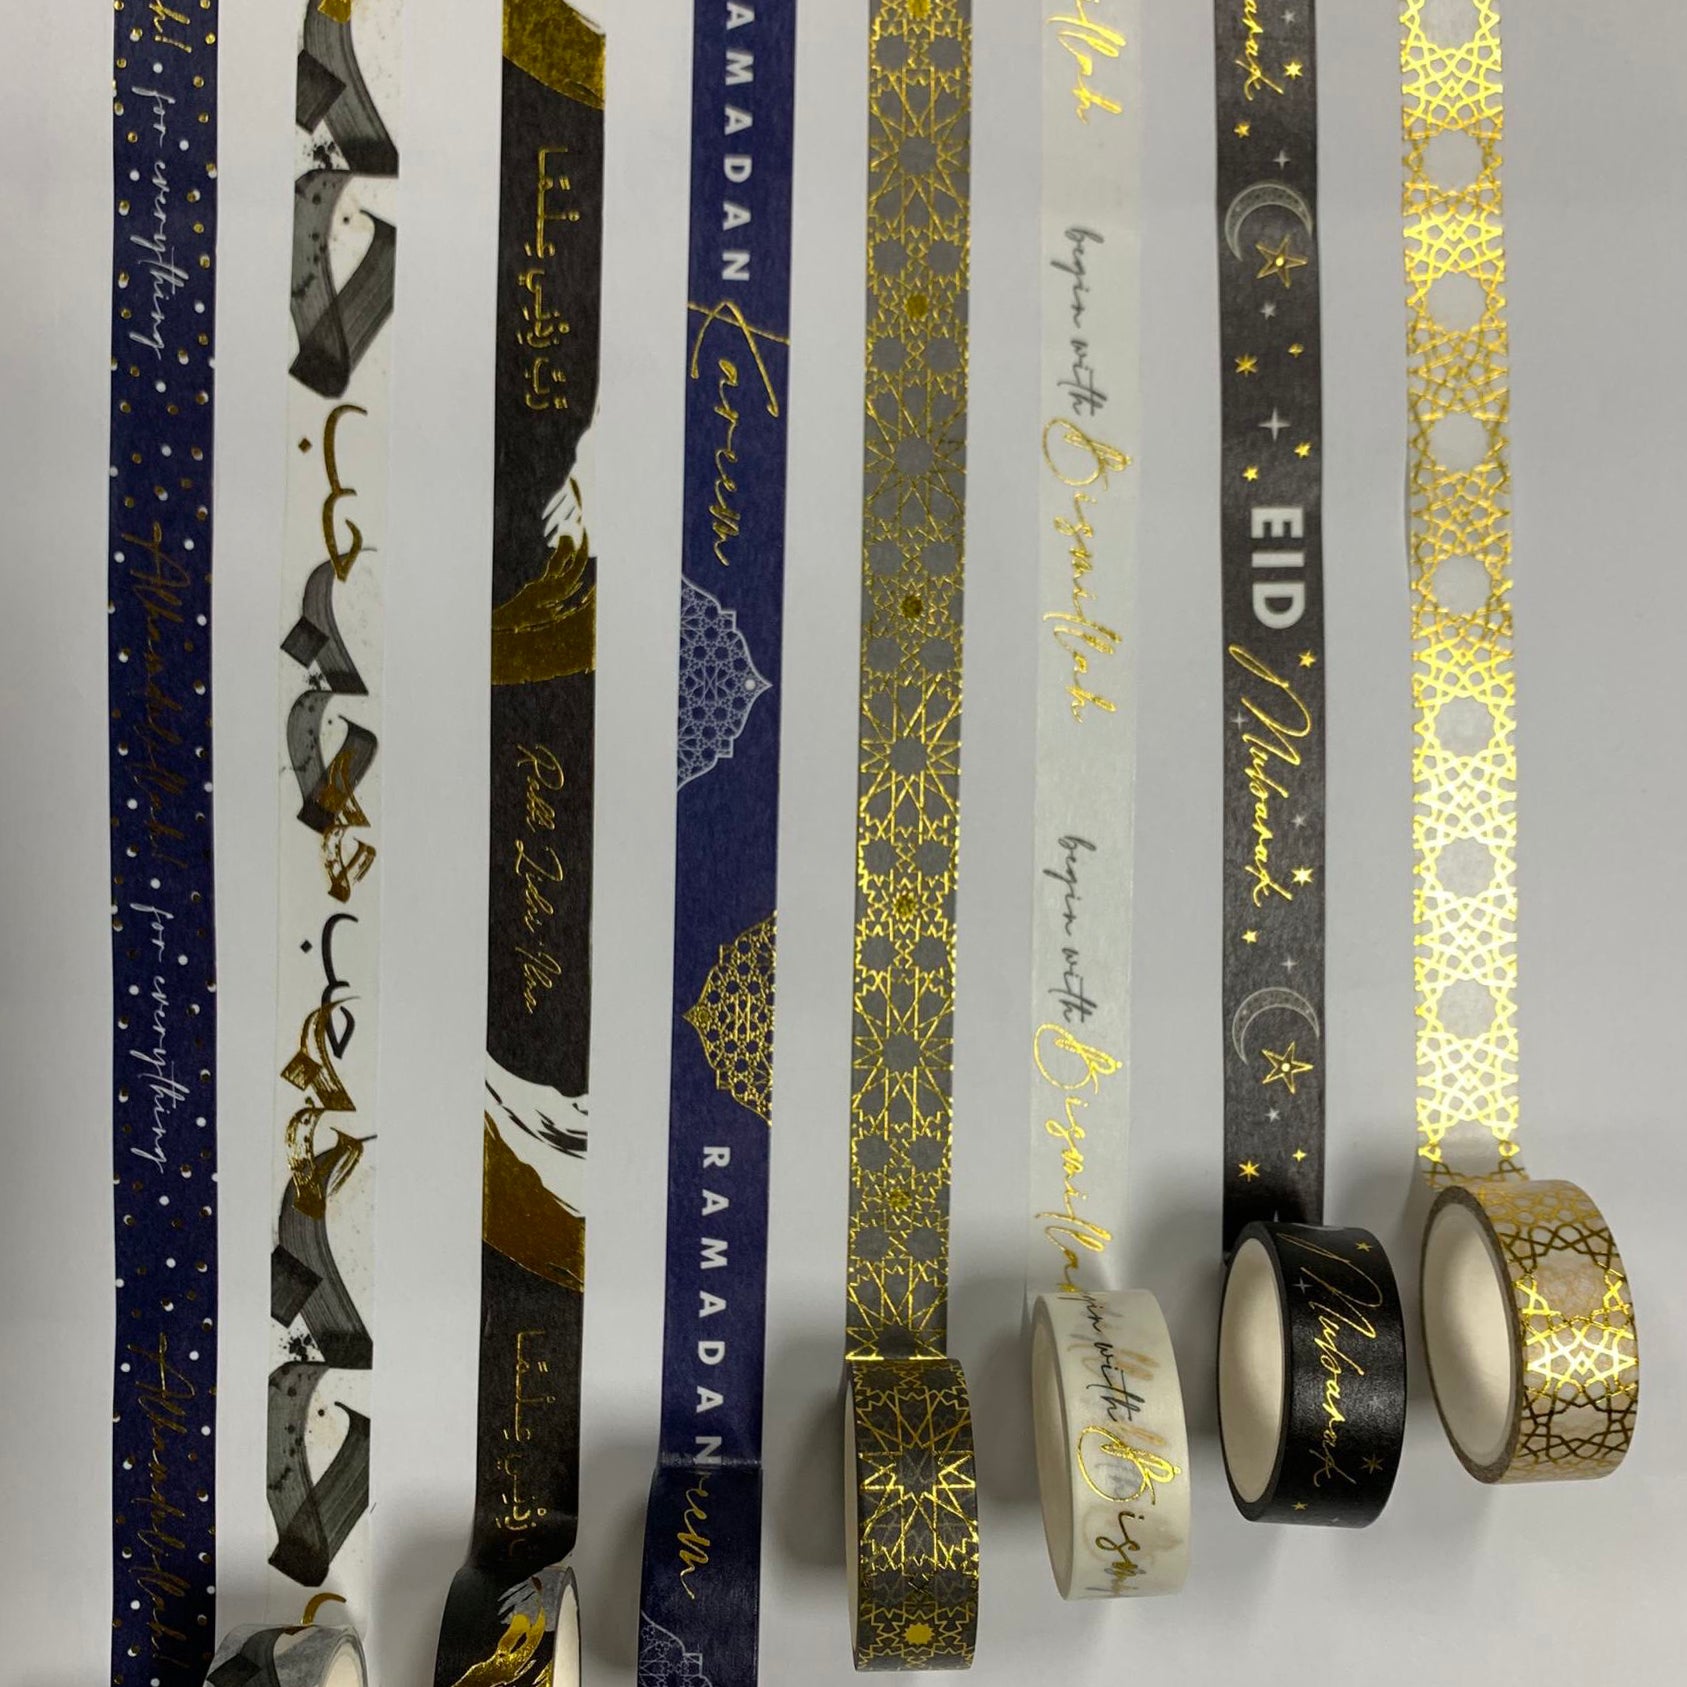 Gold foiled Washi Tapes 15mm x 5m or 10m Rolls By Safar London